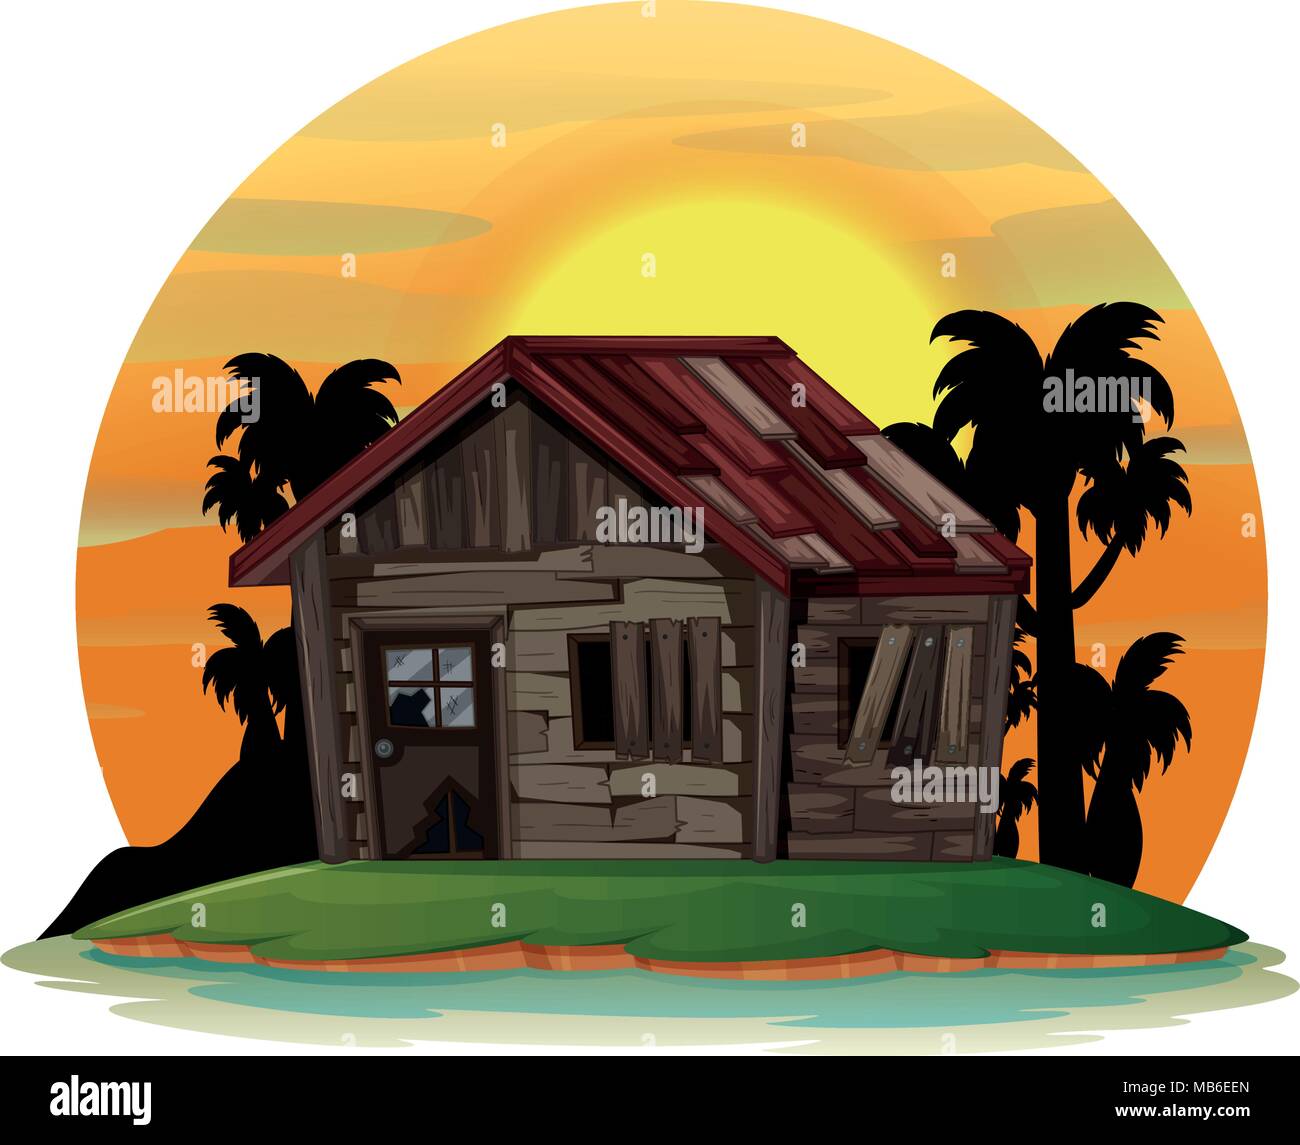 Background scene with old wooden house on island illustration Stock ...